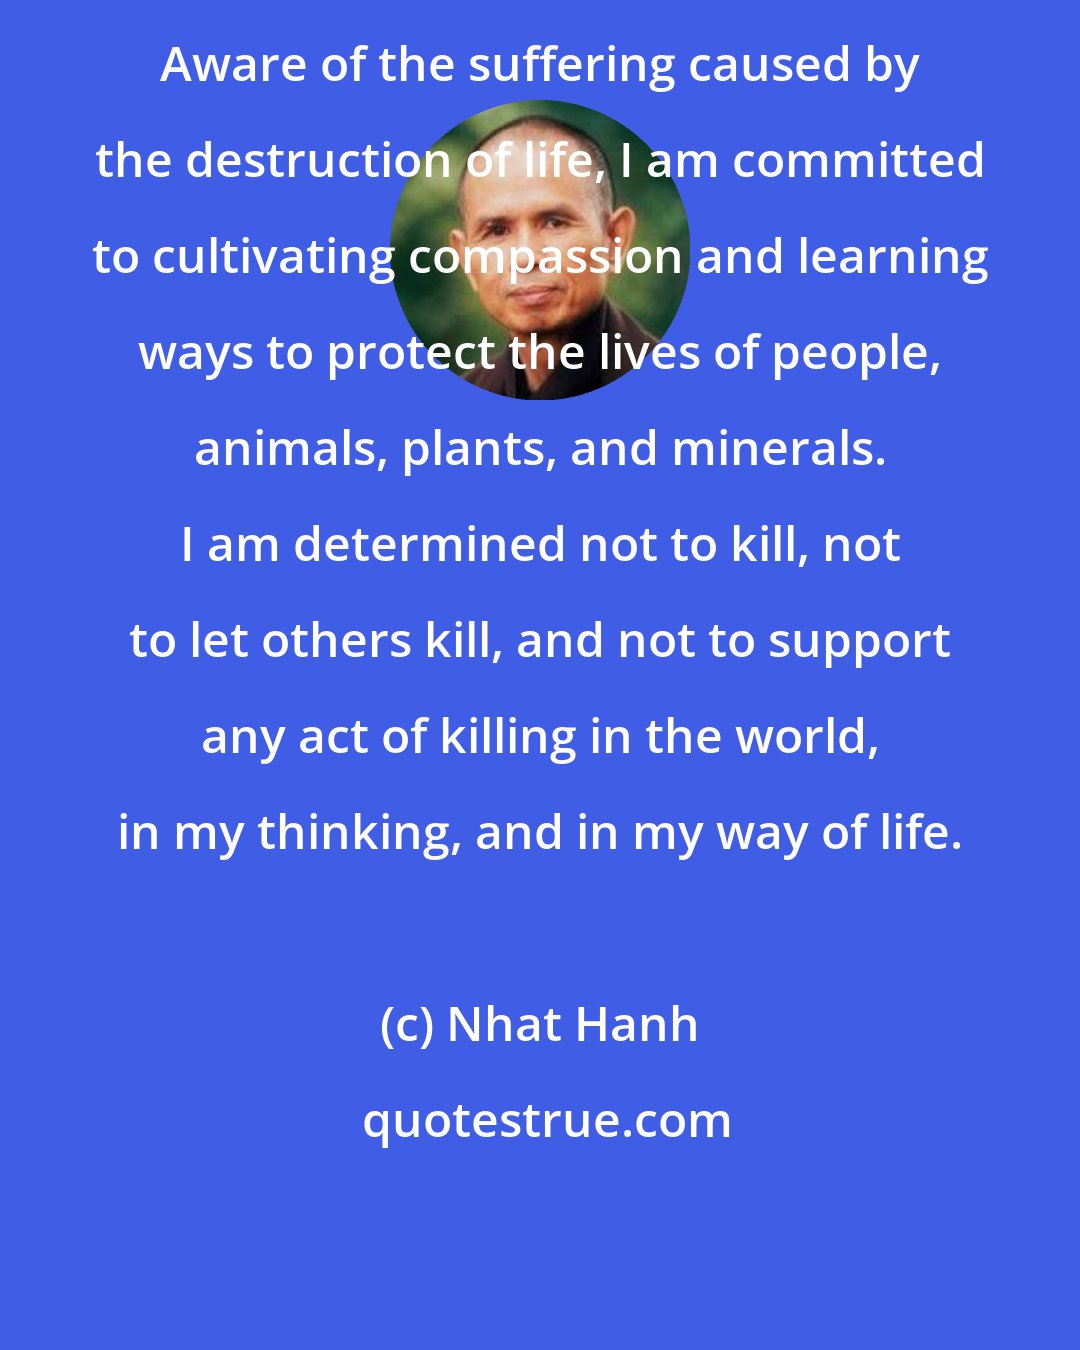 Nhat Hanh: Aware of the suffering caused by the destruction of life, I am committed to cultivating compassion and learning ways to protect the lives of people, animals, plants, and minerals. I am determined not to kill, not to let others kill, and not to support any act of killing in the world, in my thinking, and in my way of life.